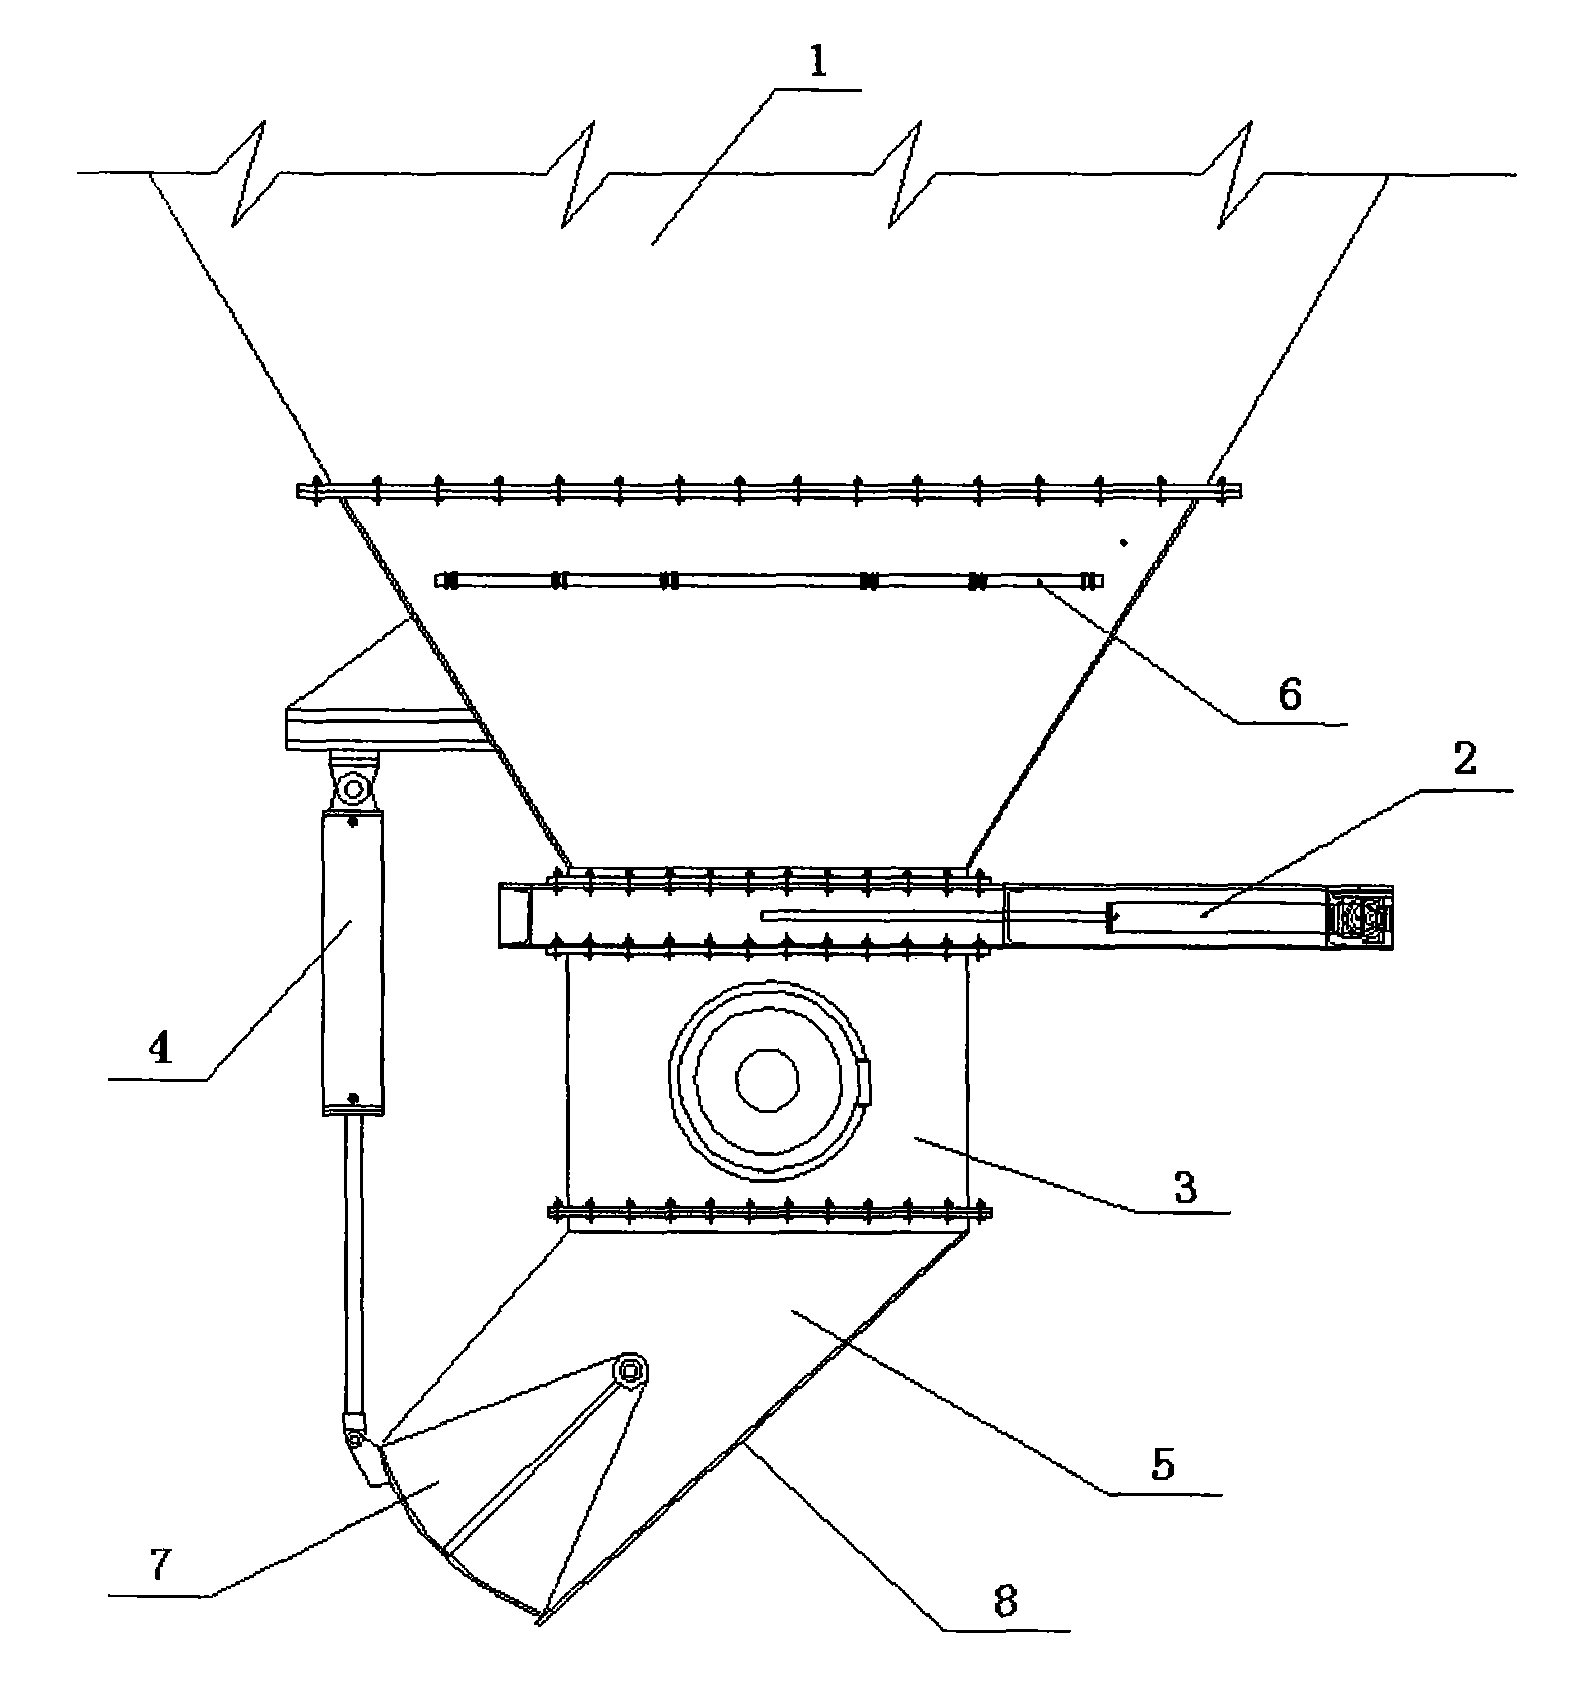 Electrical hydraulic combined discharging device